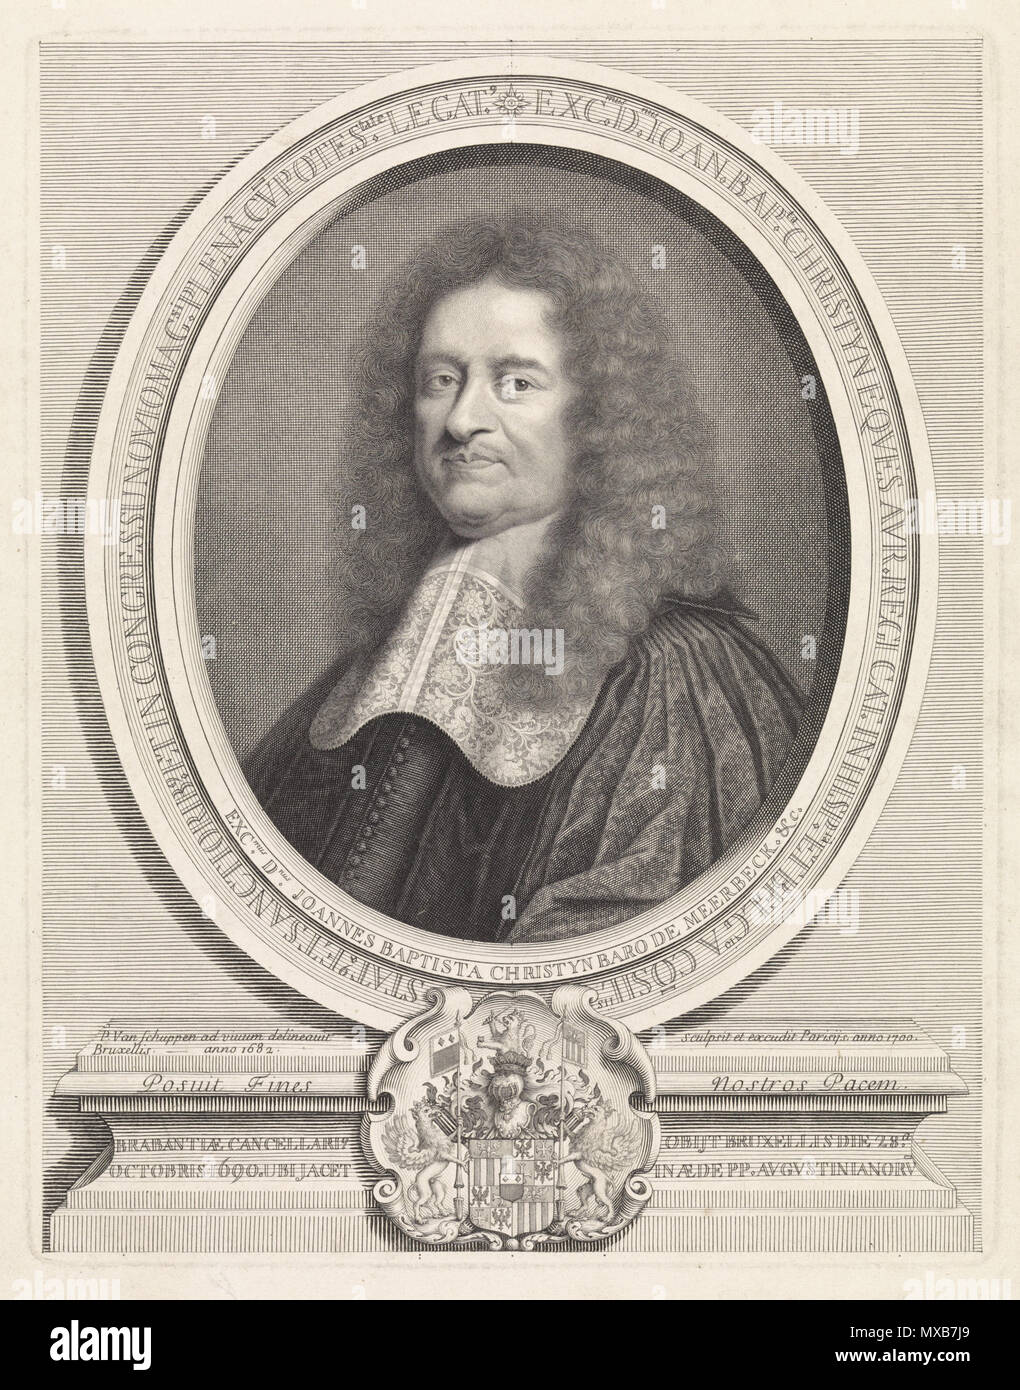 . English: A 1700 engraving by Pieter van Schuppen from a portrait of Jean-Baptiste Christyn made c. 1678 . 1700. Pieter van Schuppen 313 Jean-Baptiste Christyn, Chancellor of Brabant Stock Photo